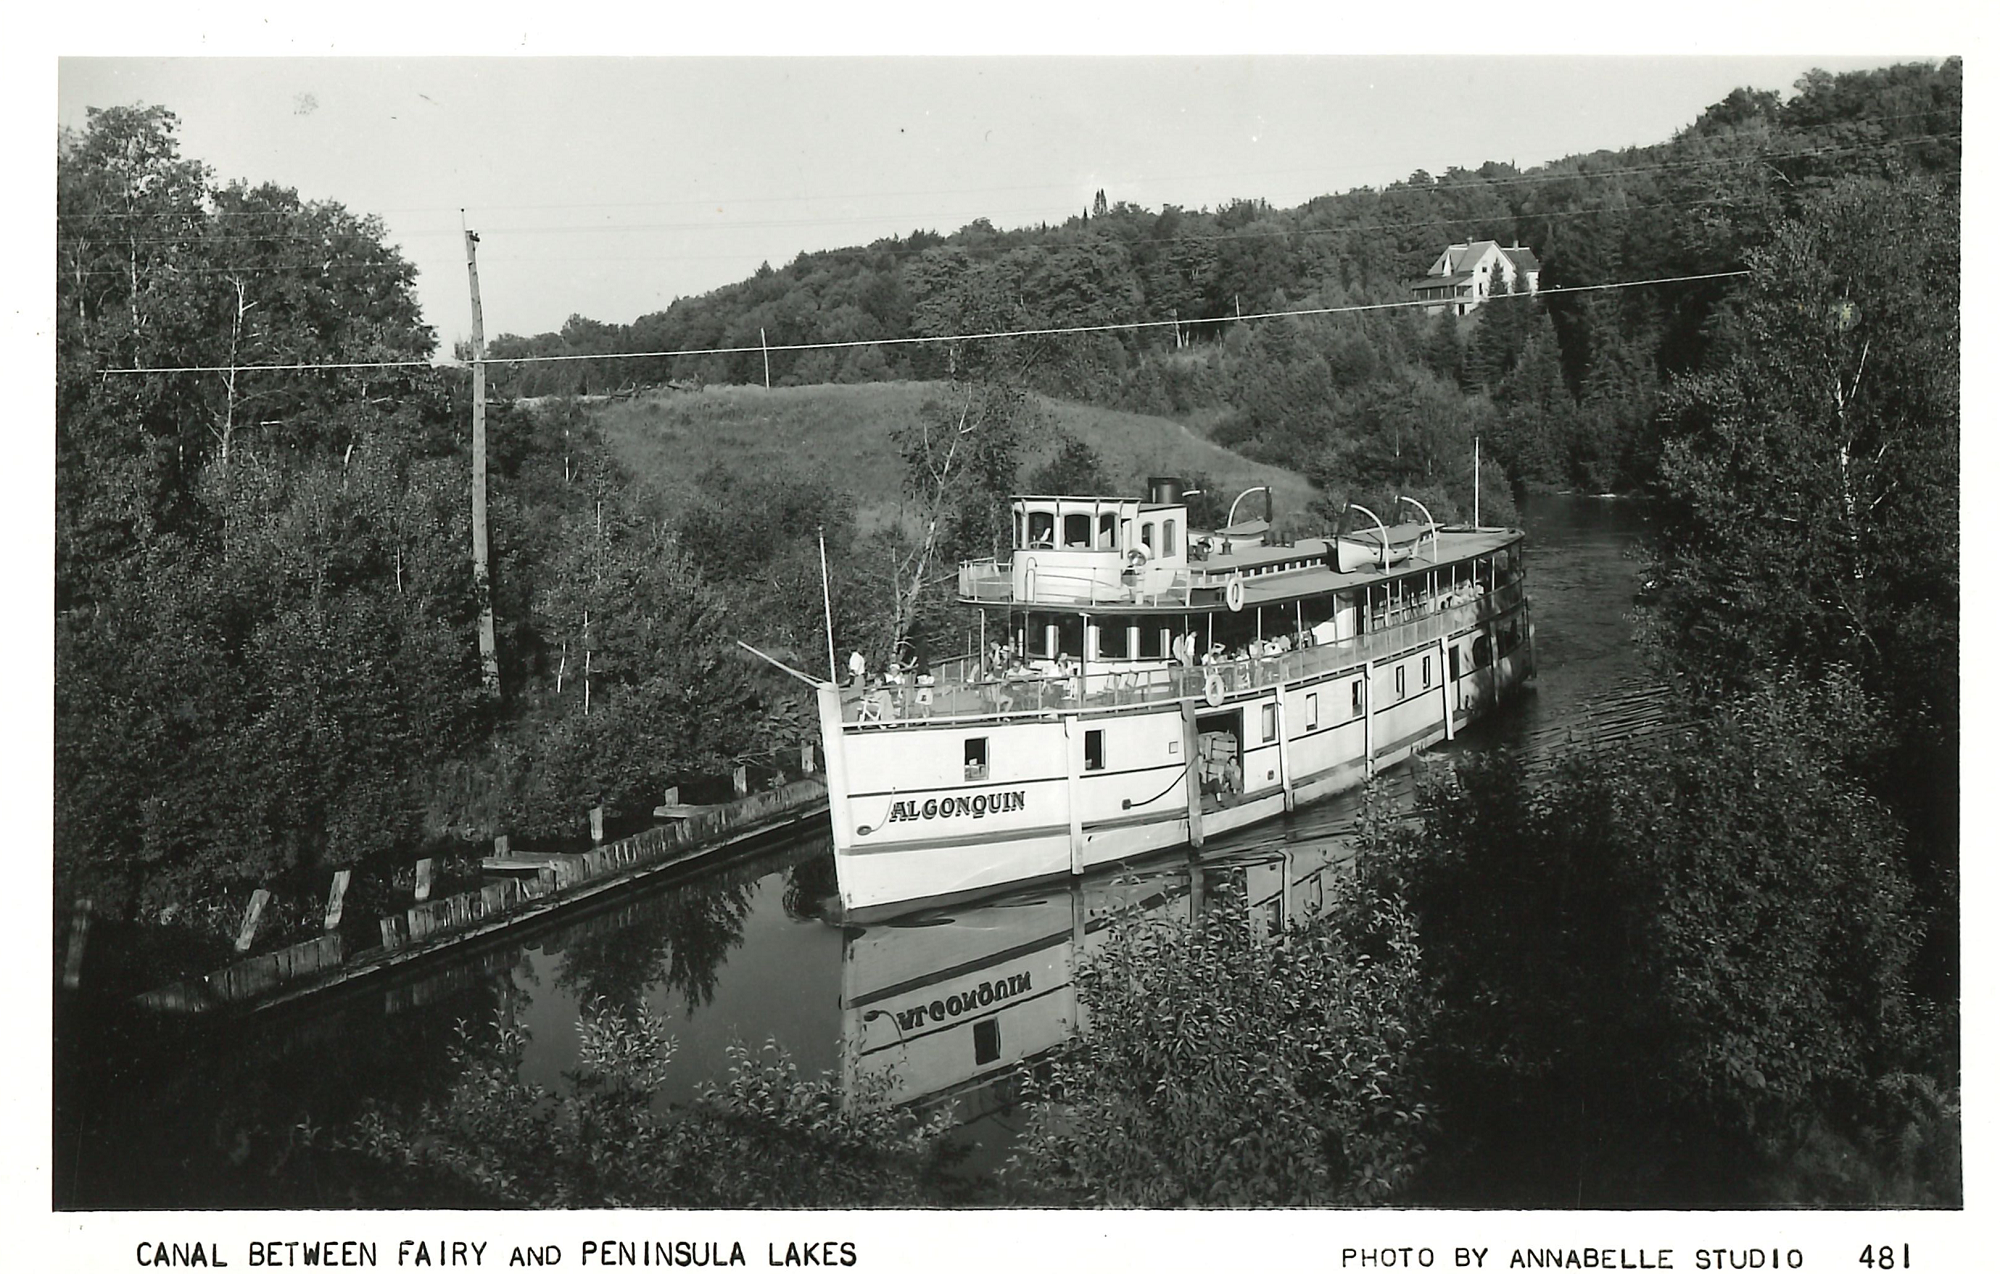 Algonquin in the Canal